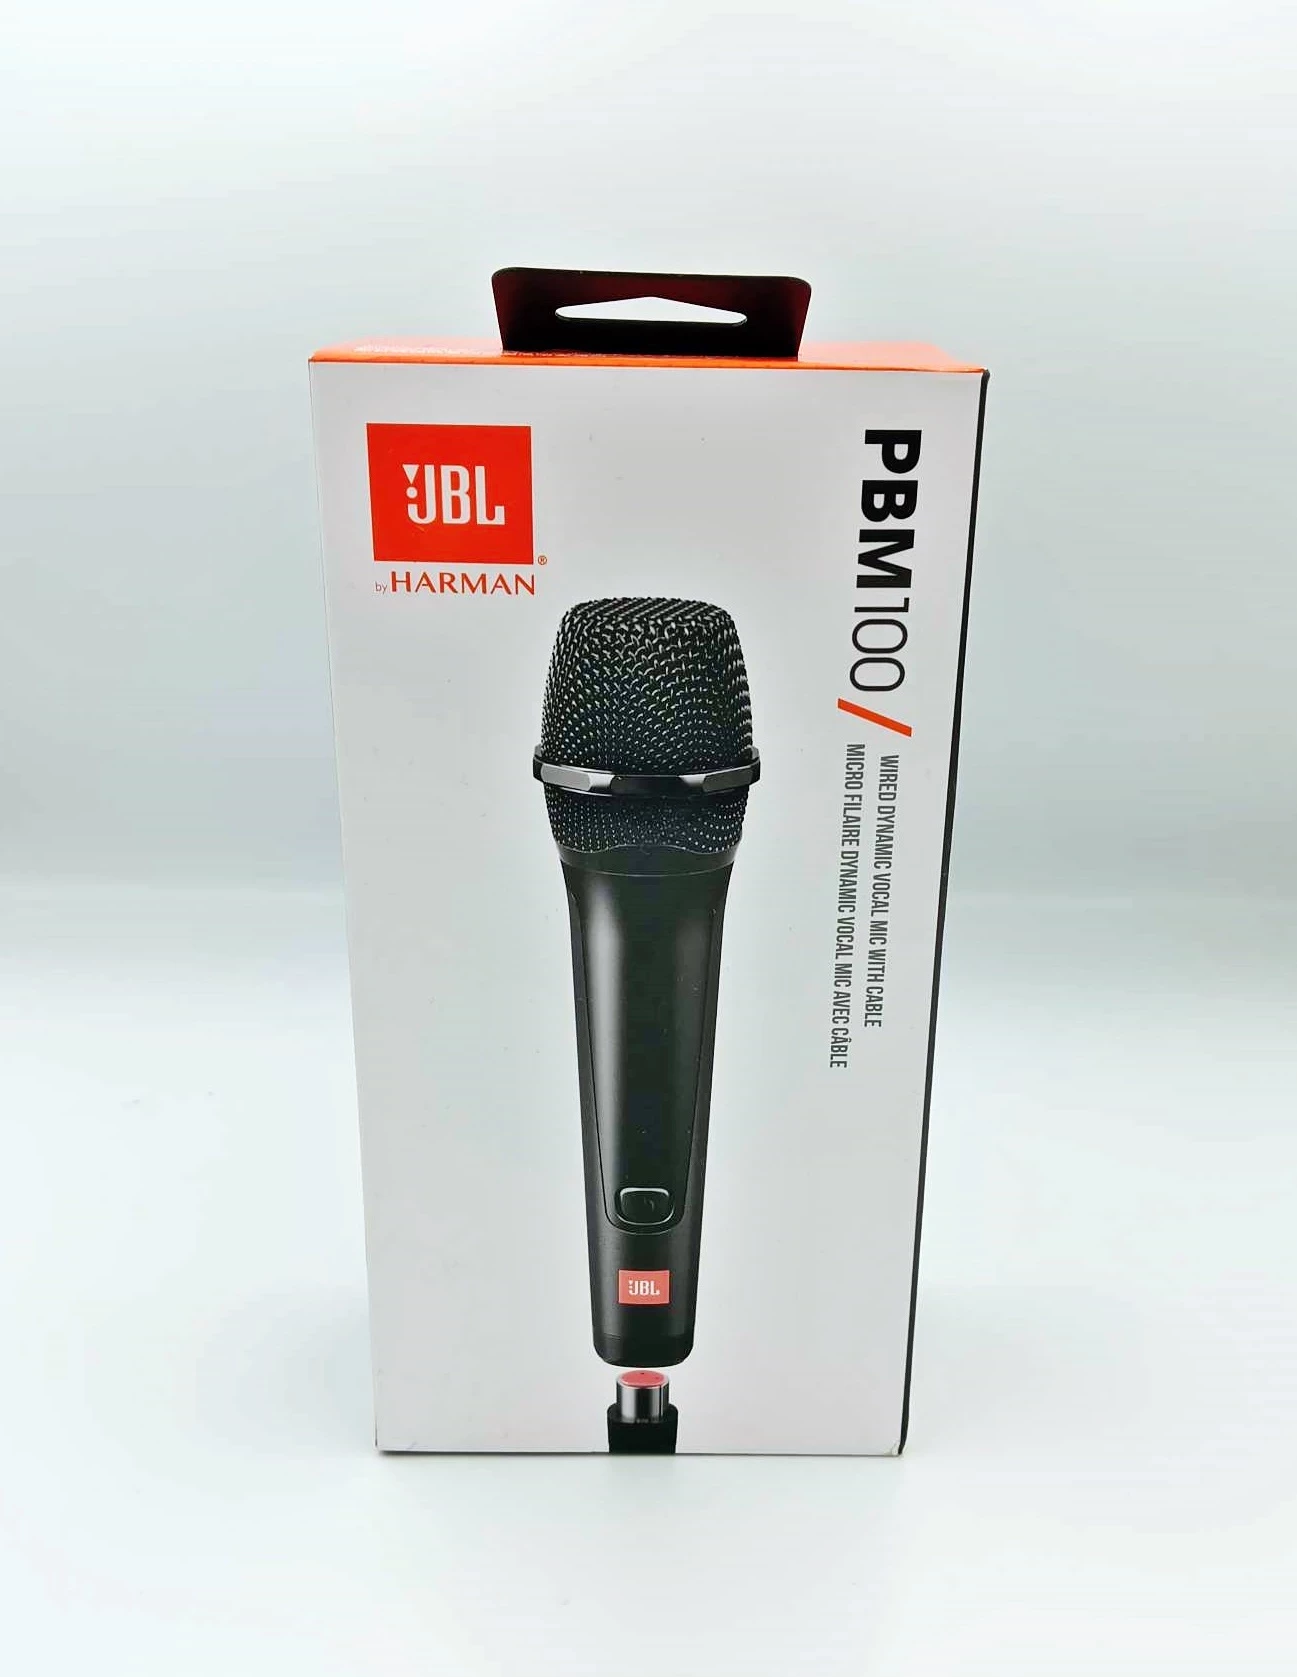 JBL PBM100 Wired Microphone  Micro filaire Dynamic Vocal Mic avec